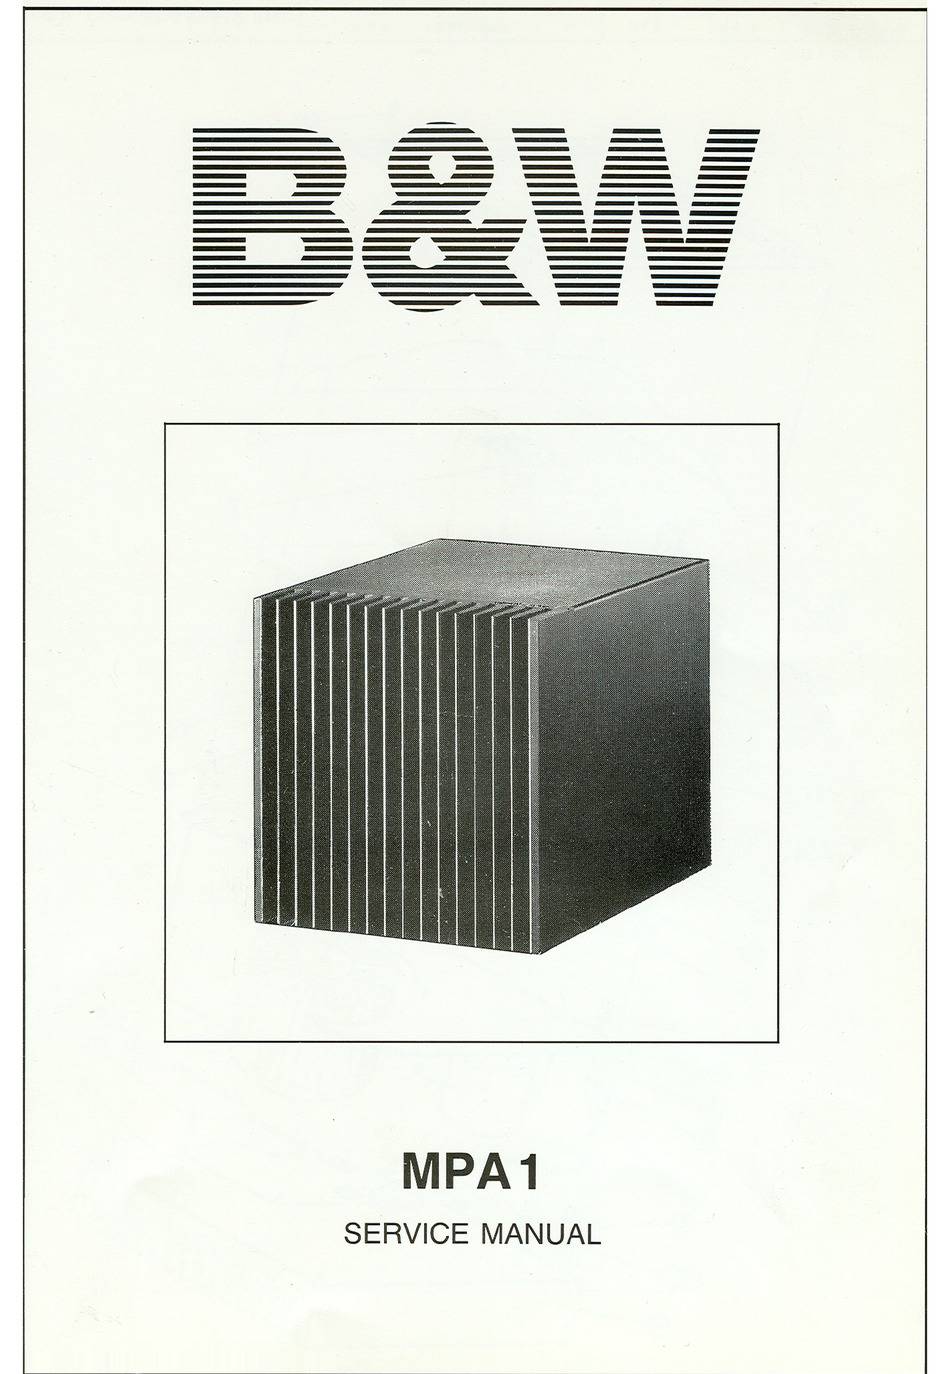 Bowers and Wilkins MPA-1